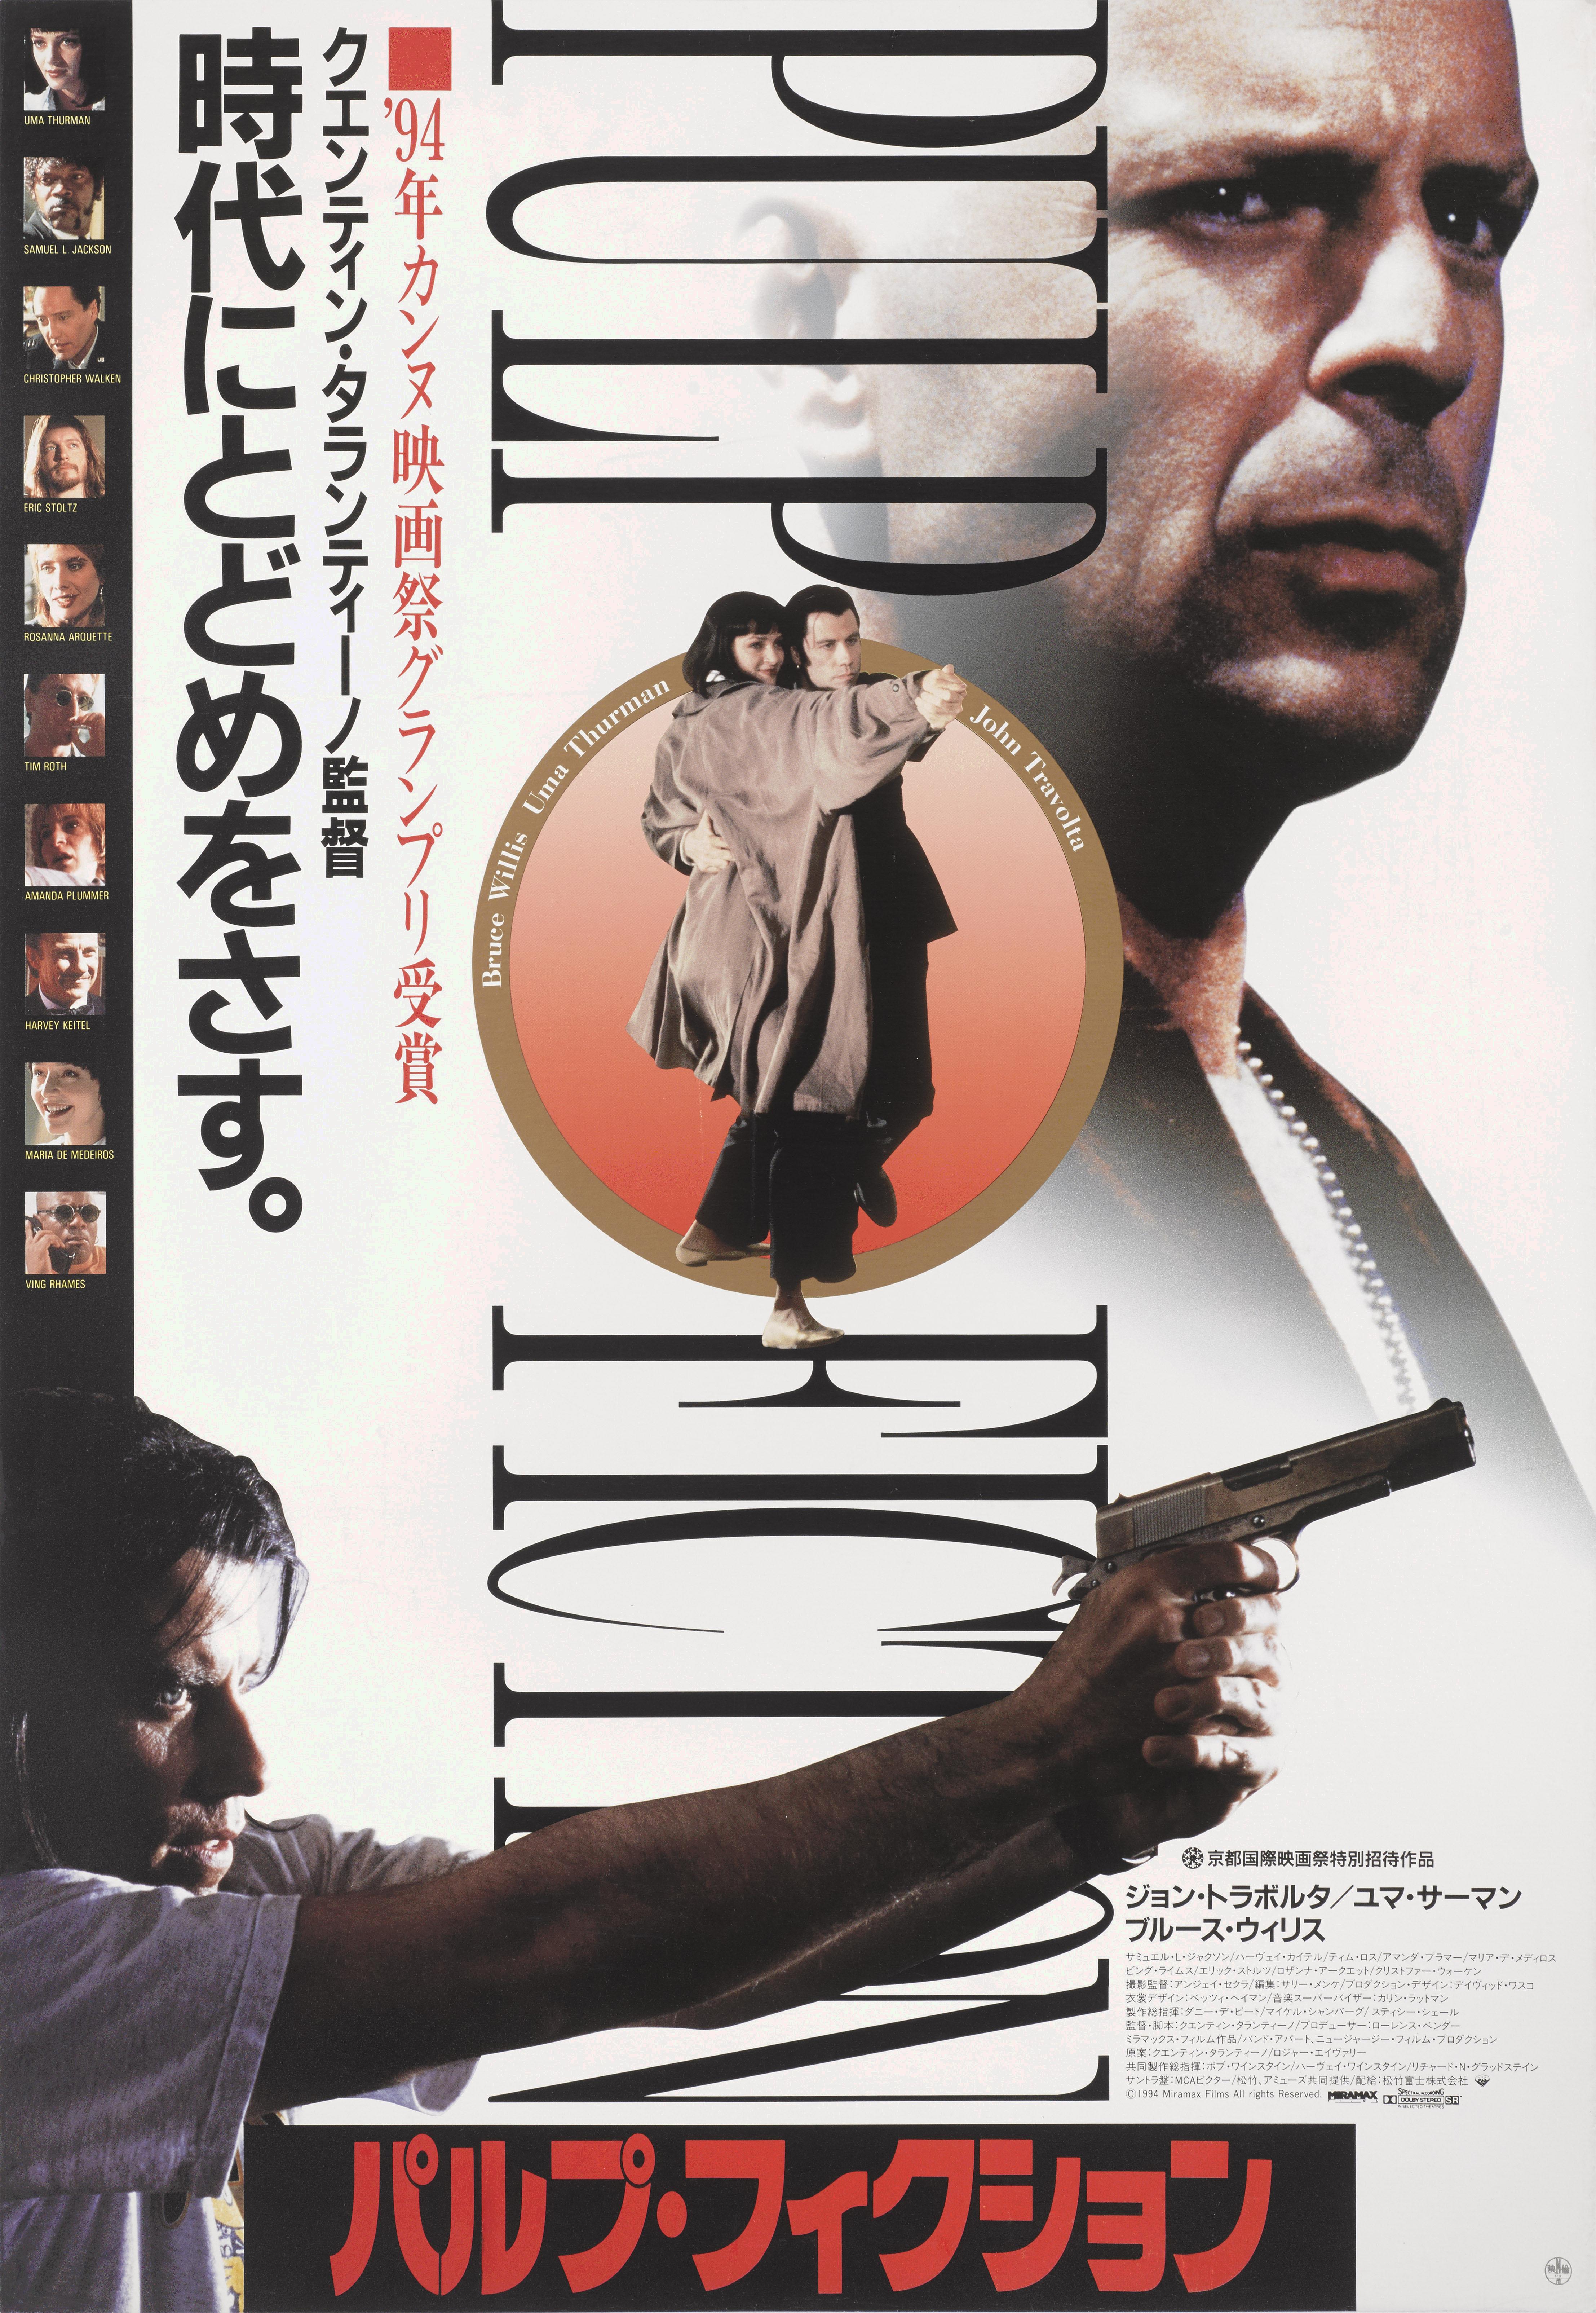 Original Japanese film poster for Quentin Tarantino Classic, 1994 cult thriller.
The artwork on this poster is unique to the films Japanese release.
This poster is unfolded and conservation linen backed and it would be shipped rolled in a very